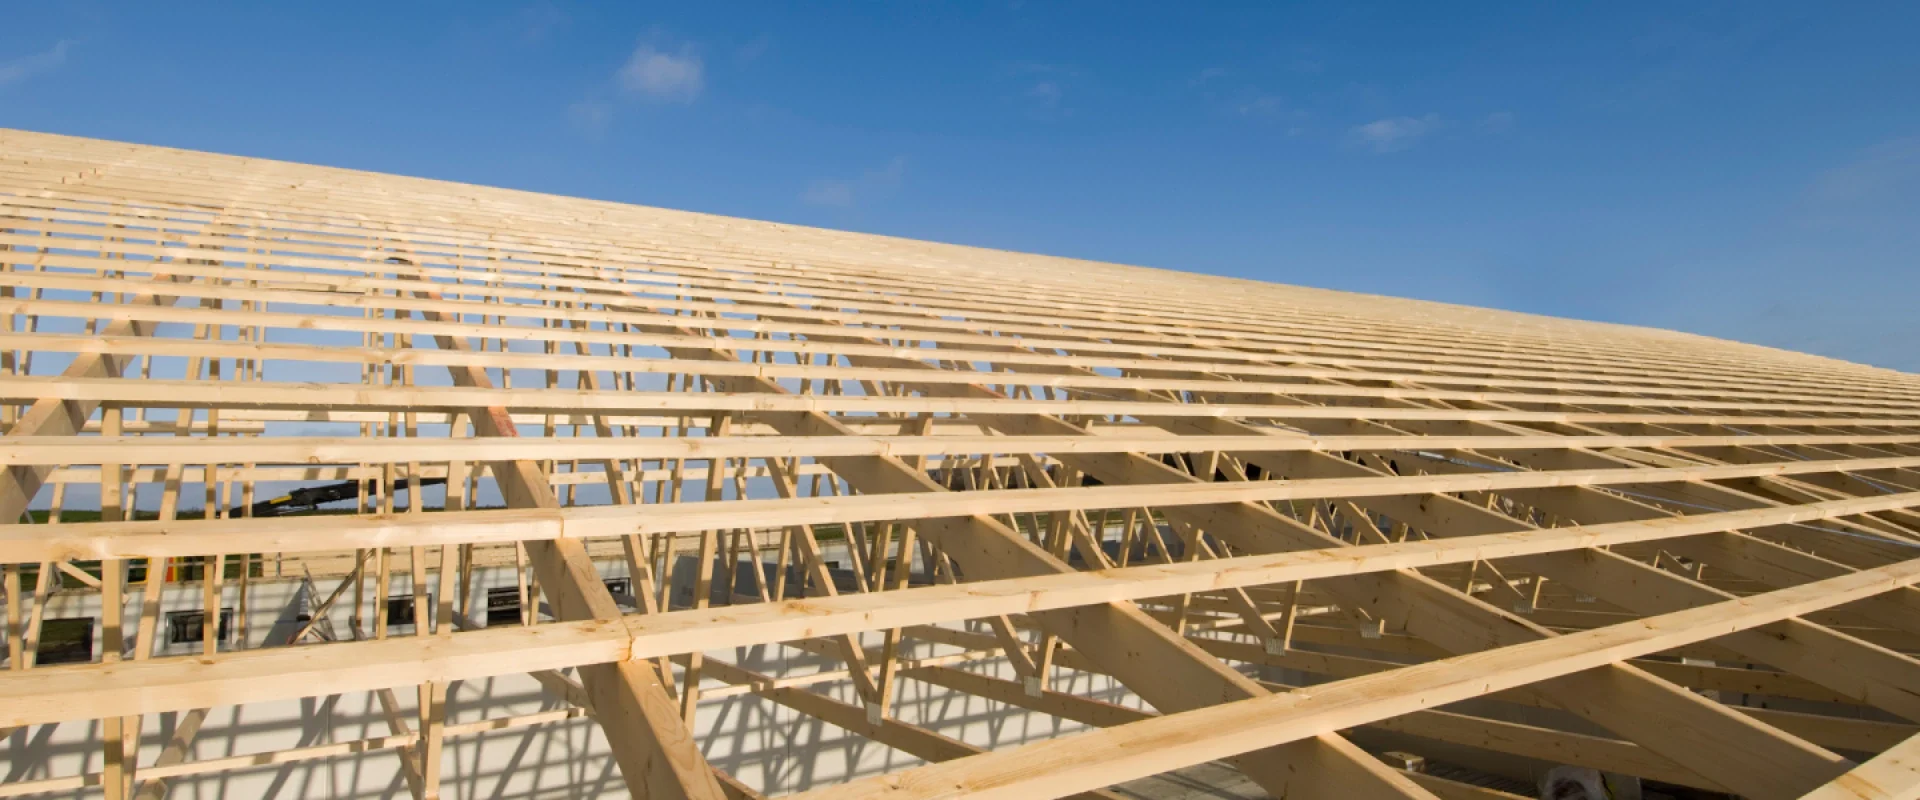 timber roof frame construction